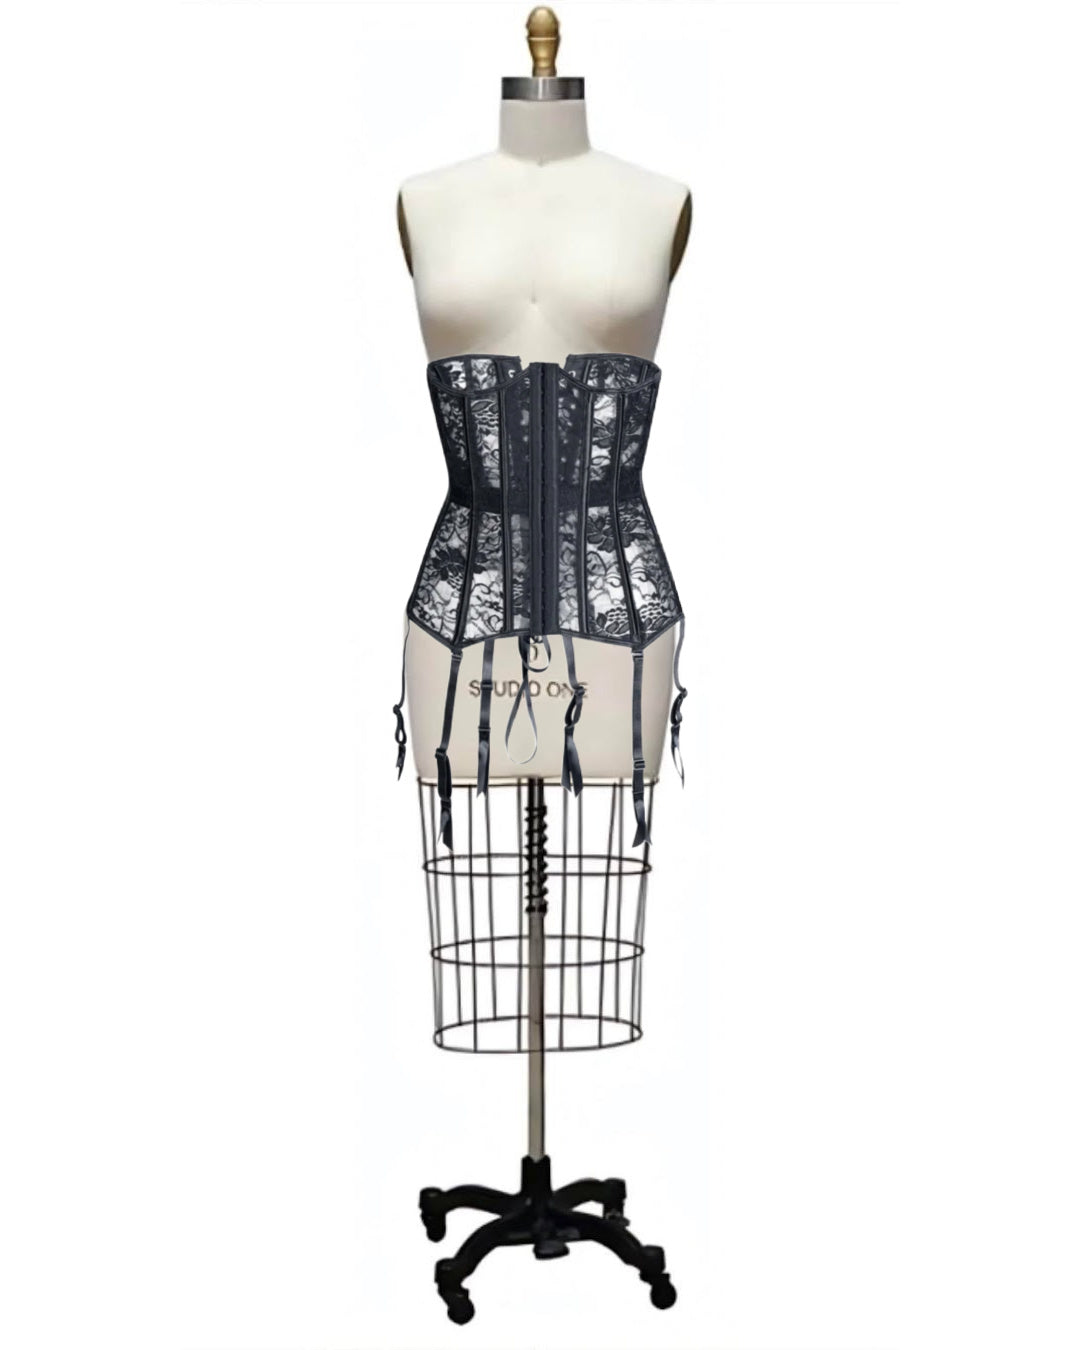 Hourglass- the Retro Paneled Mesh or Lace Boned Waist Cincher 9 Styles